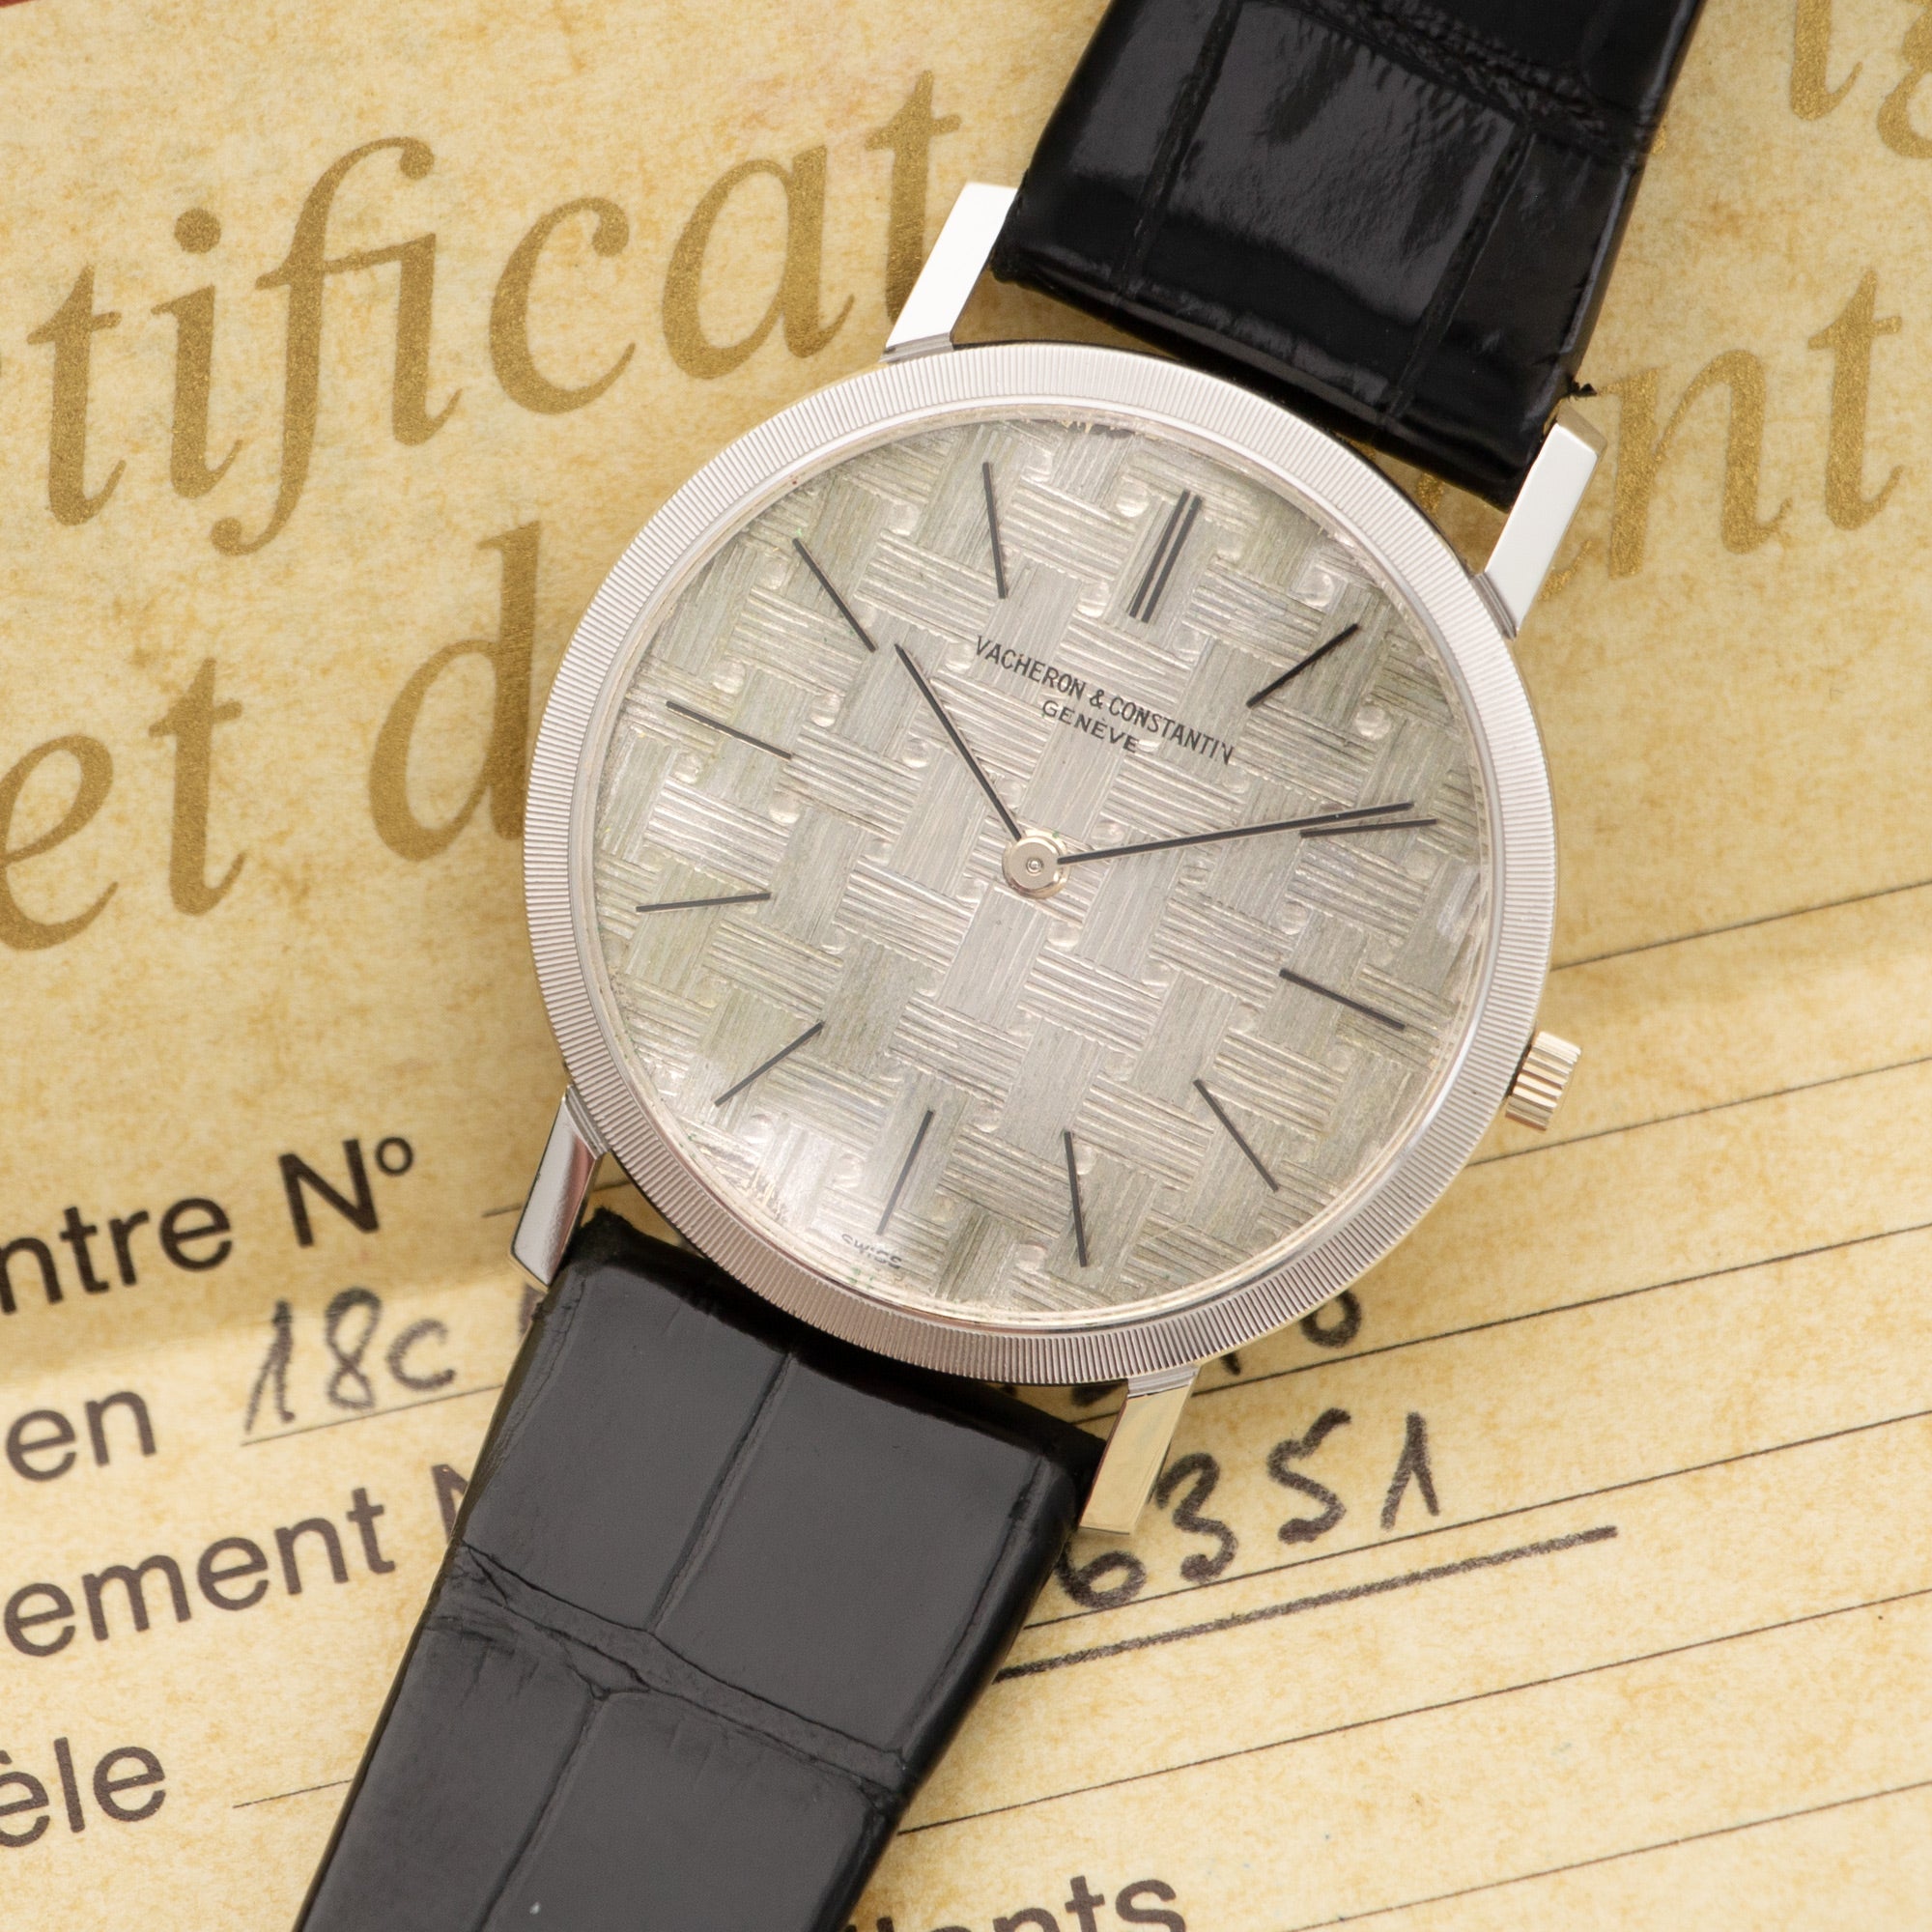 Vacheron Constantin - Vacheron Constantin White Gold Watch Ref. 6351 with Original Box and Papers - The Keystone Watches